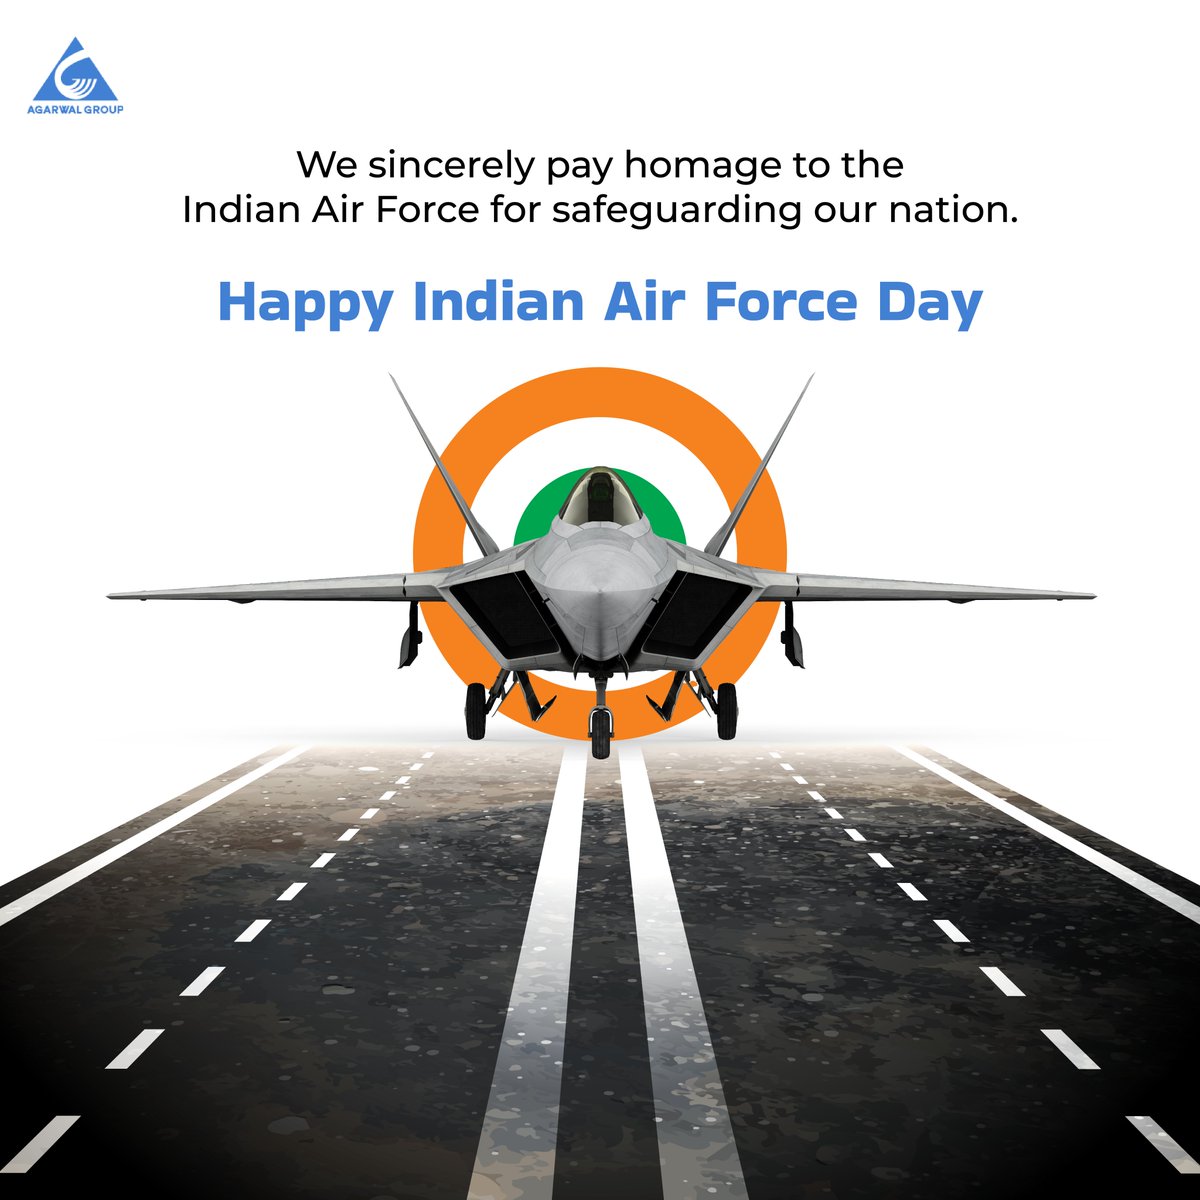 Saluting the Guardians of the Sky on Indian Air Force Day! 🇮🇳✈️ 
#IAFDay #AirWarriors #ProudToProtect #AICL #Bitumen #AirForceDay2023 #AirForceDay #IndianAirForce